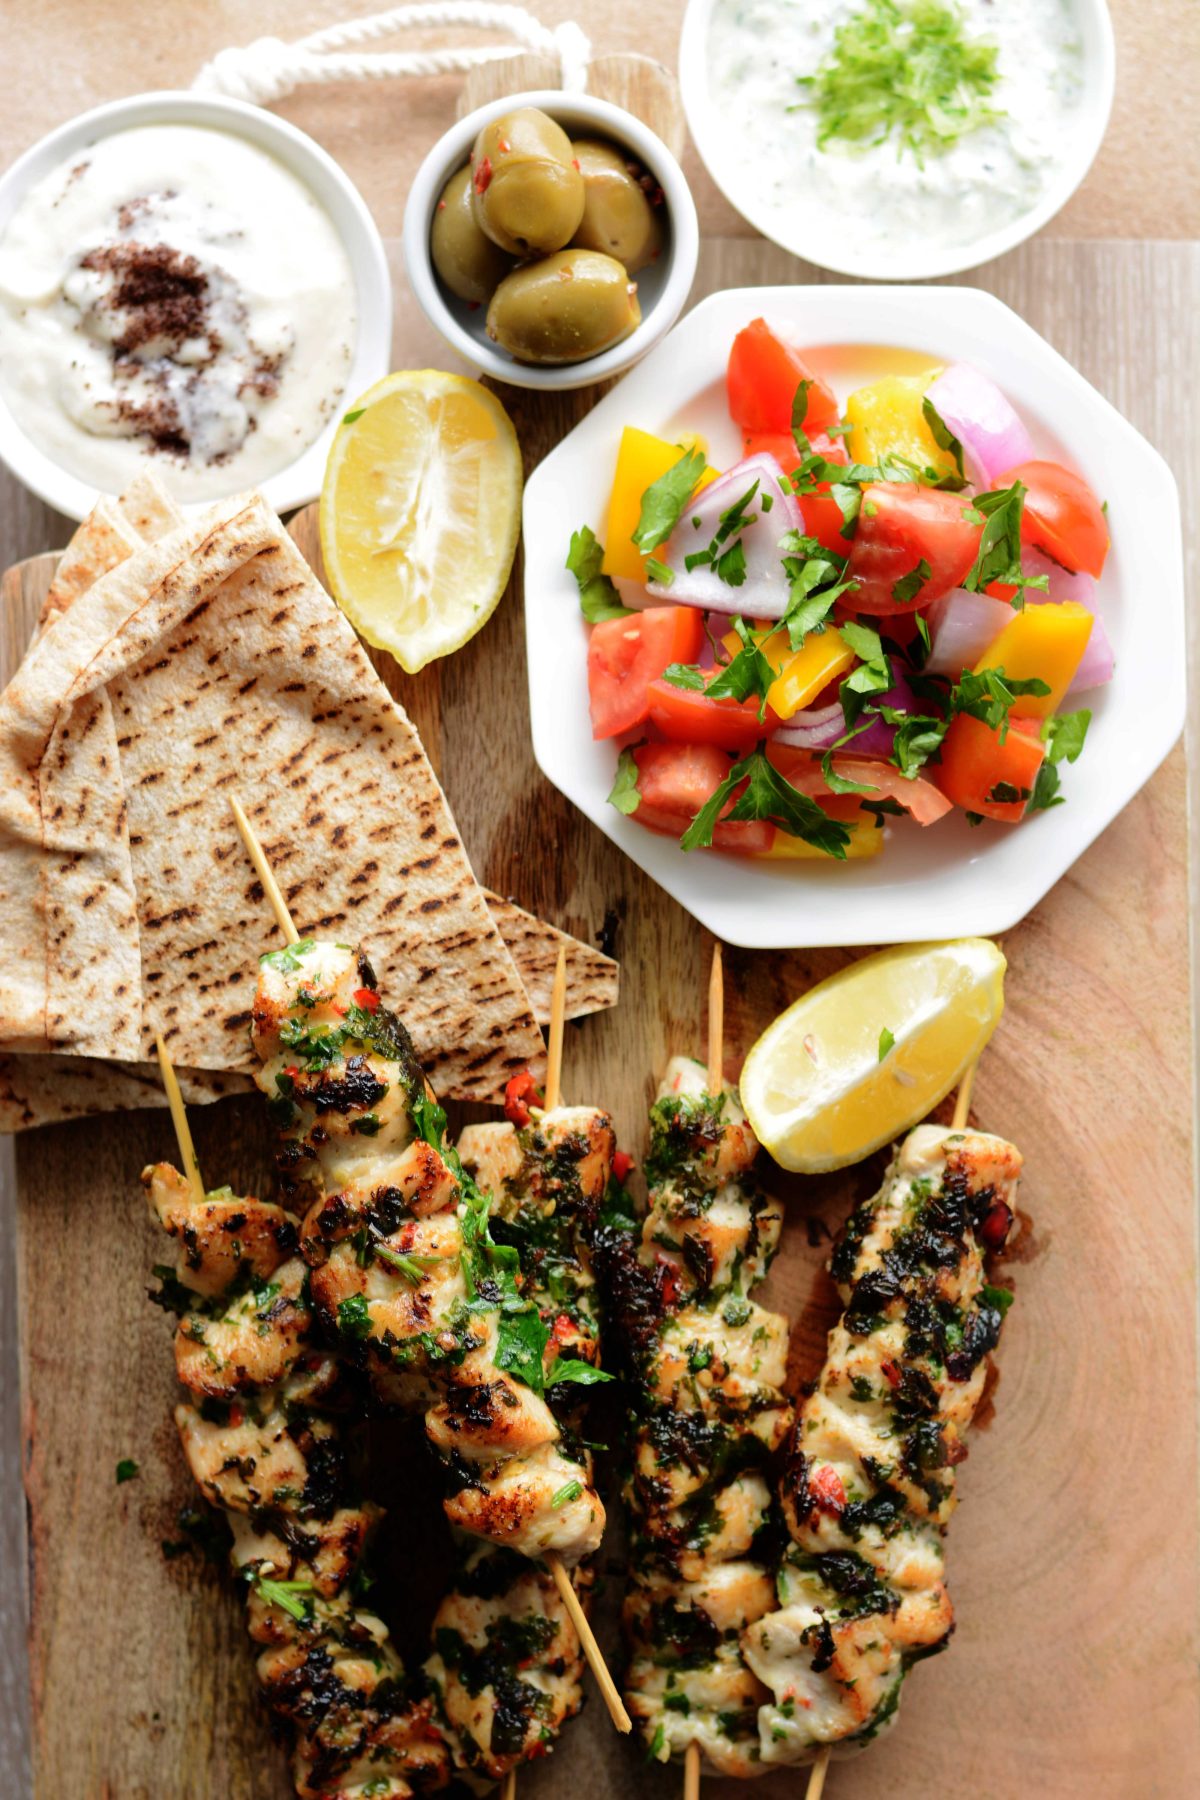 Herby and delicious - Grilled Chicken Skewers (with Fresh Herbs and Chillies) - thespiceadventuress.com